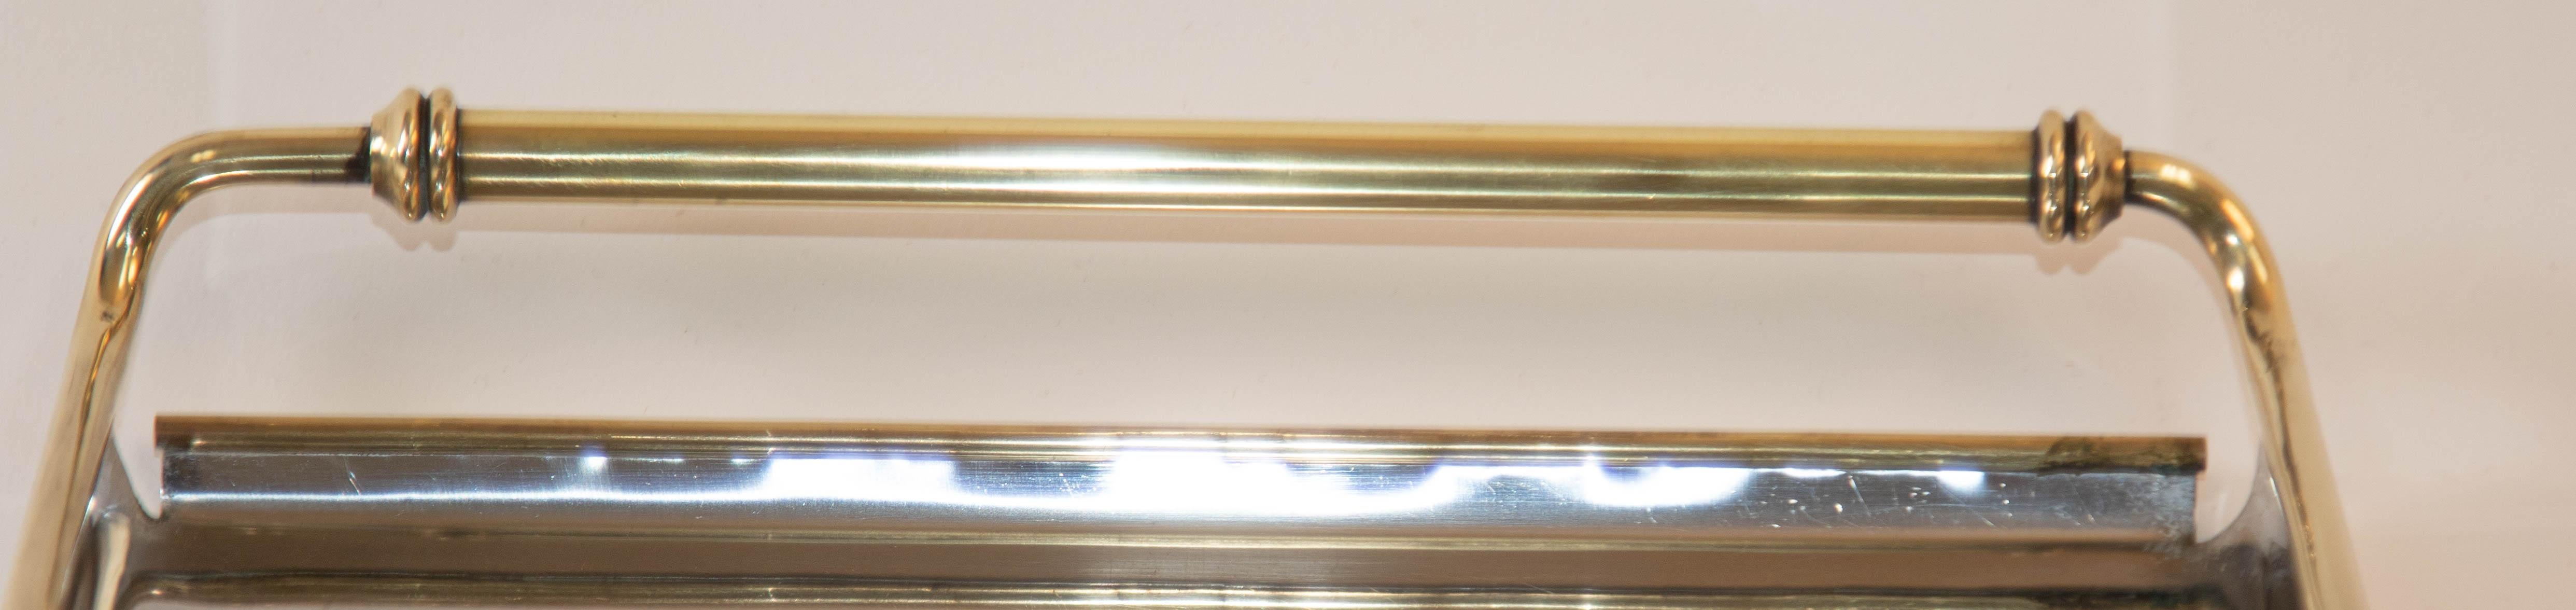 1950s Art Deco Metal Tray Chrome Mirrored with Brass Handles 5